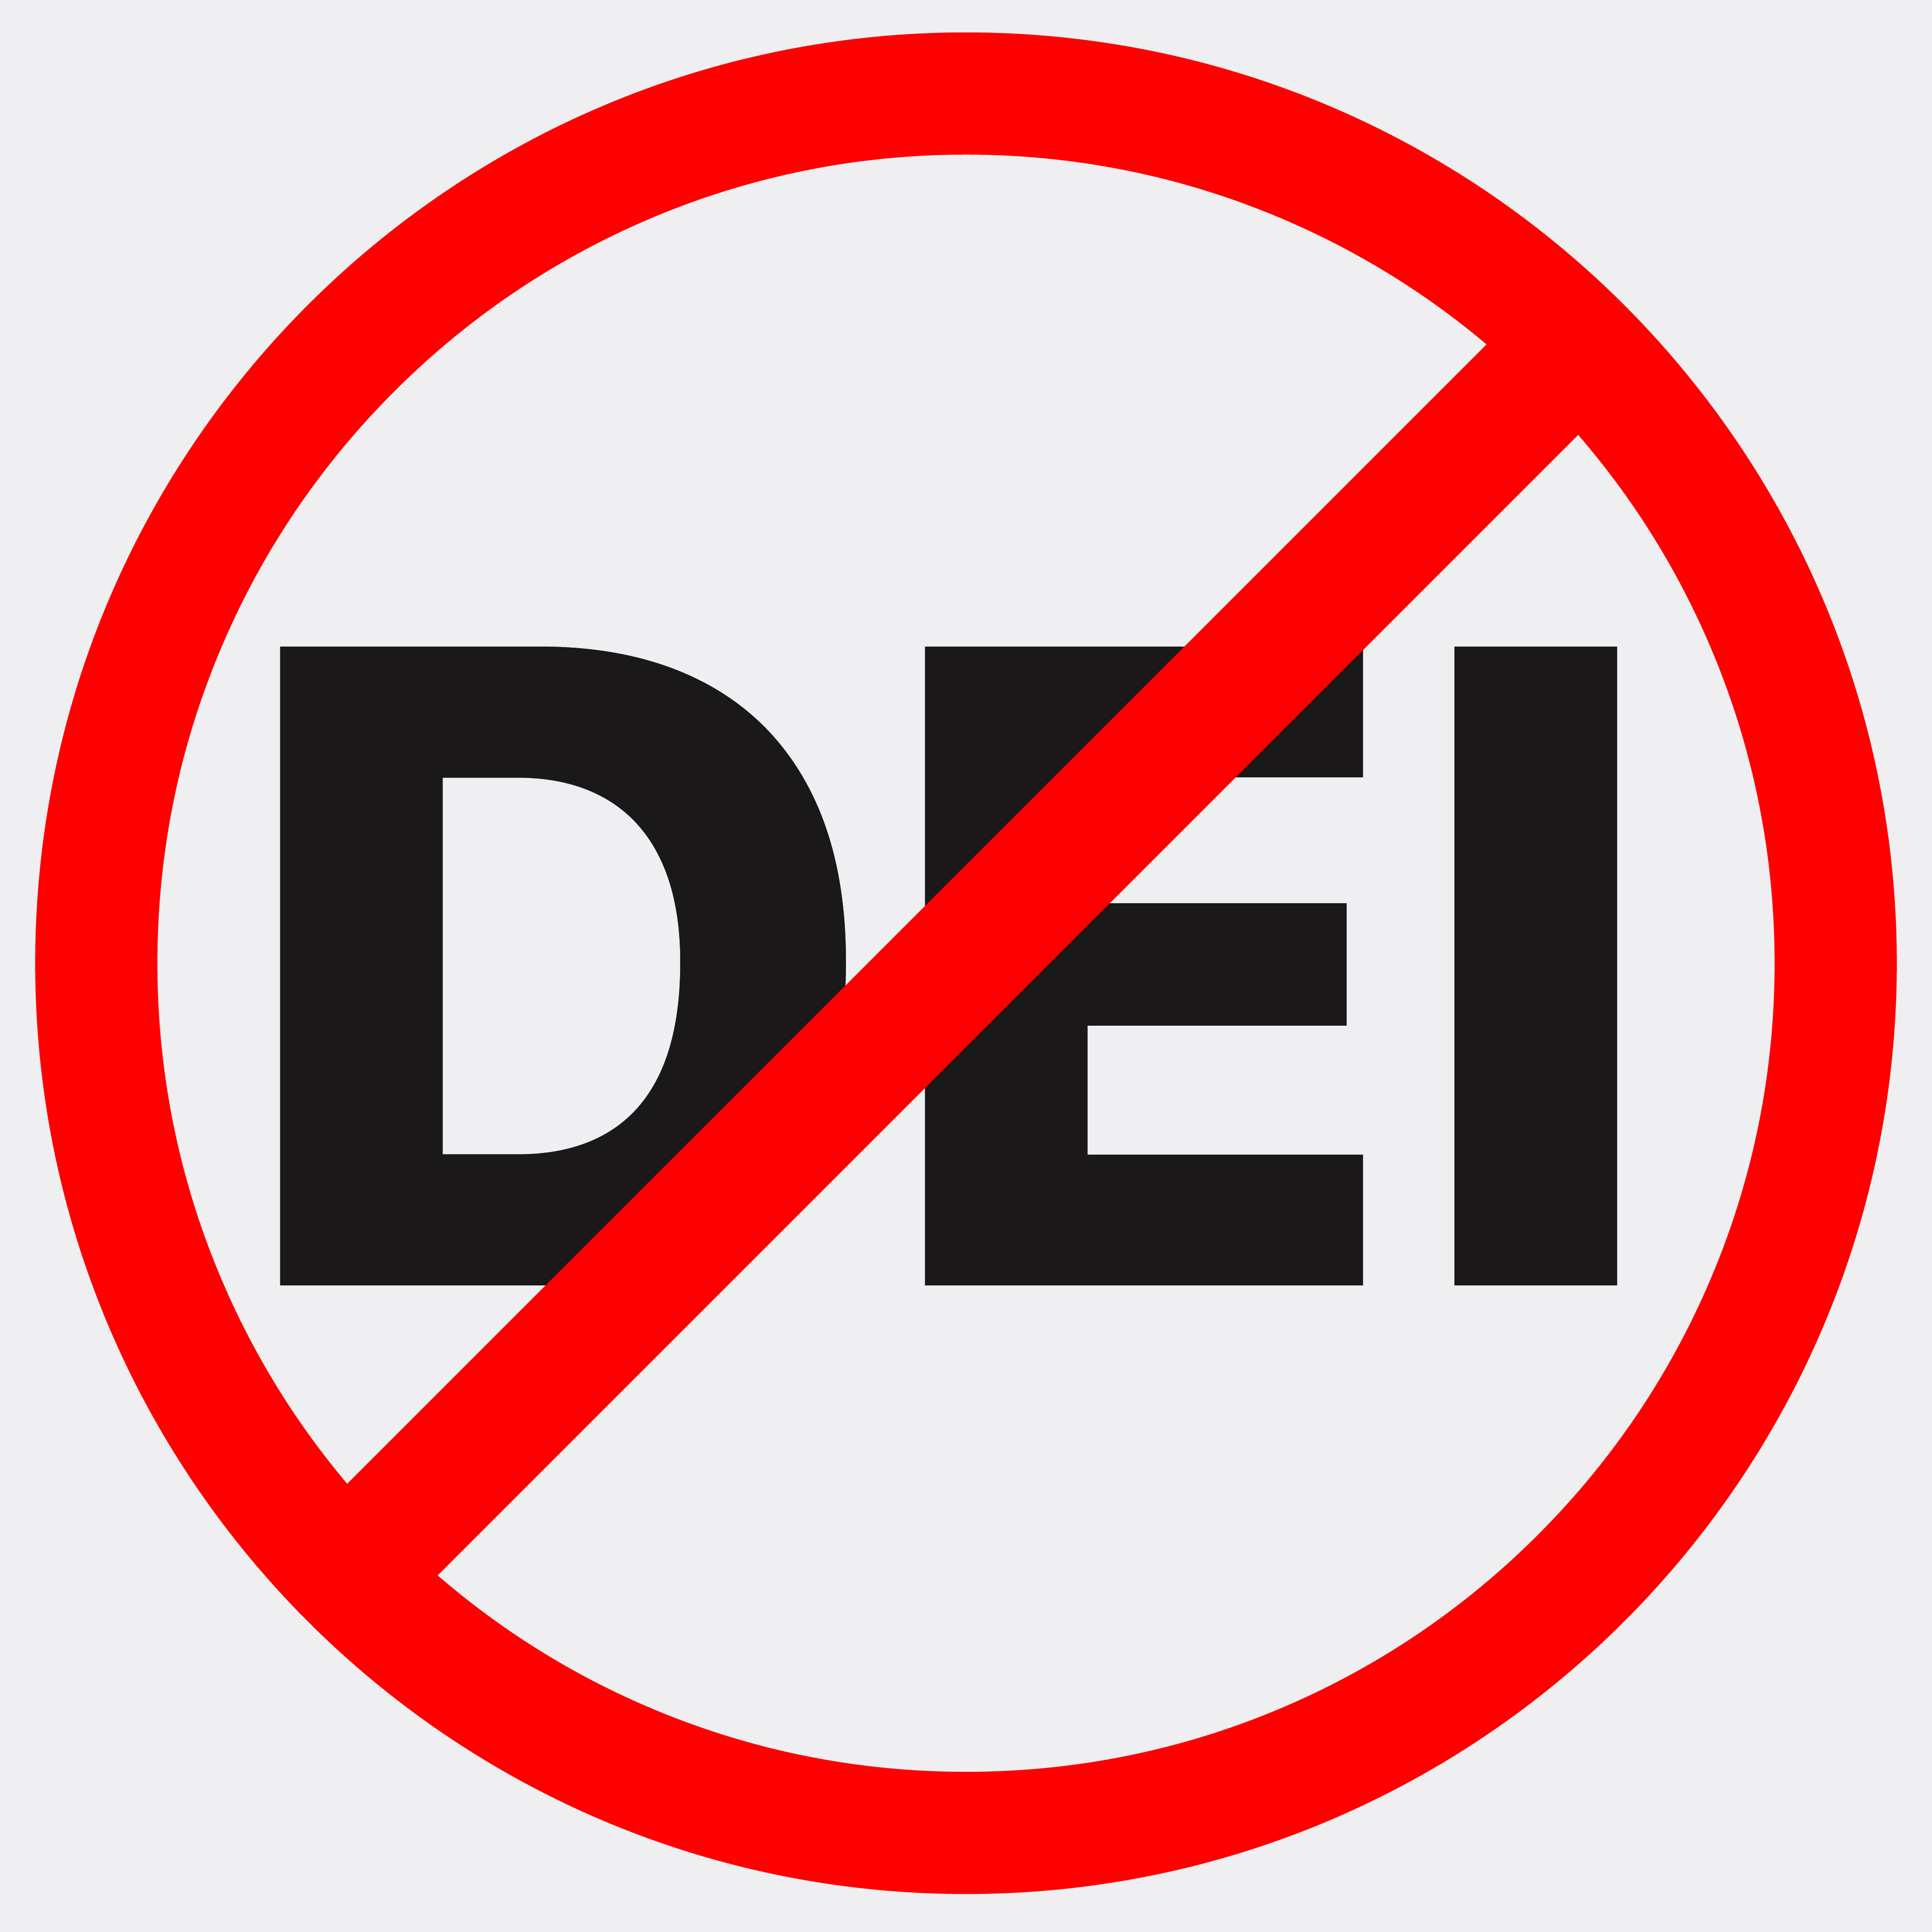 The letters DEI with the red "prohibited" sign crossing out the letters